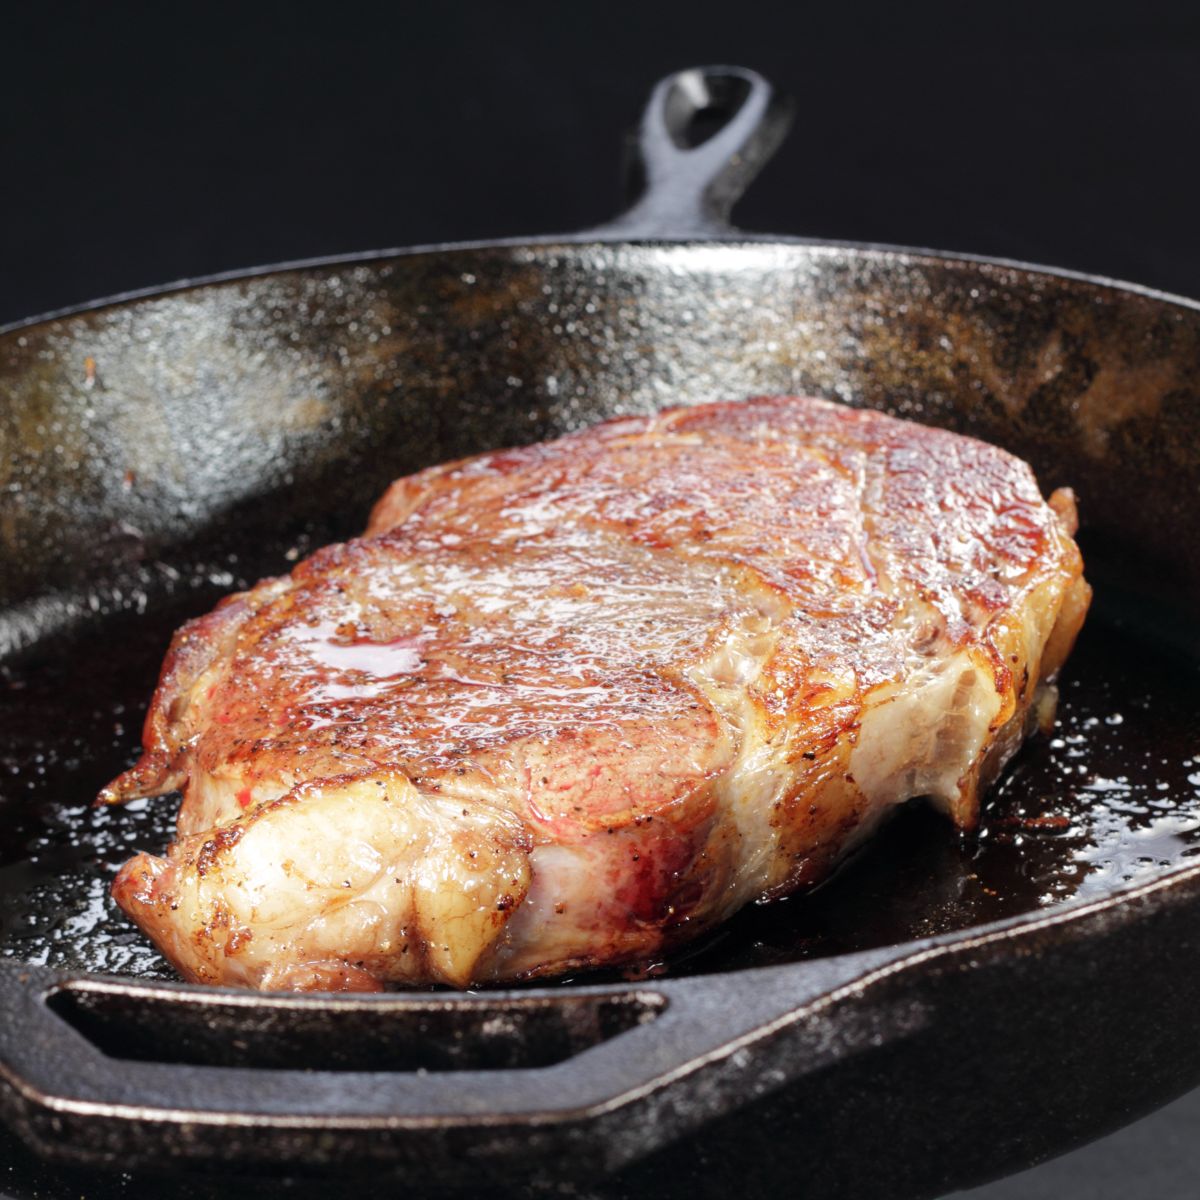 Searing Cast Iron Vs. Stainless Steel - What's Best For Your Steak?